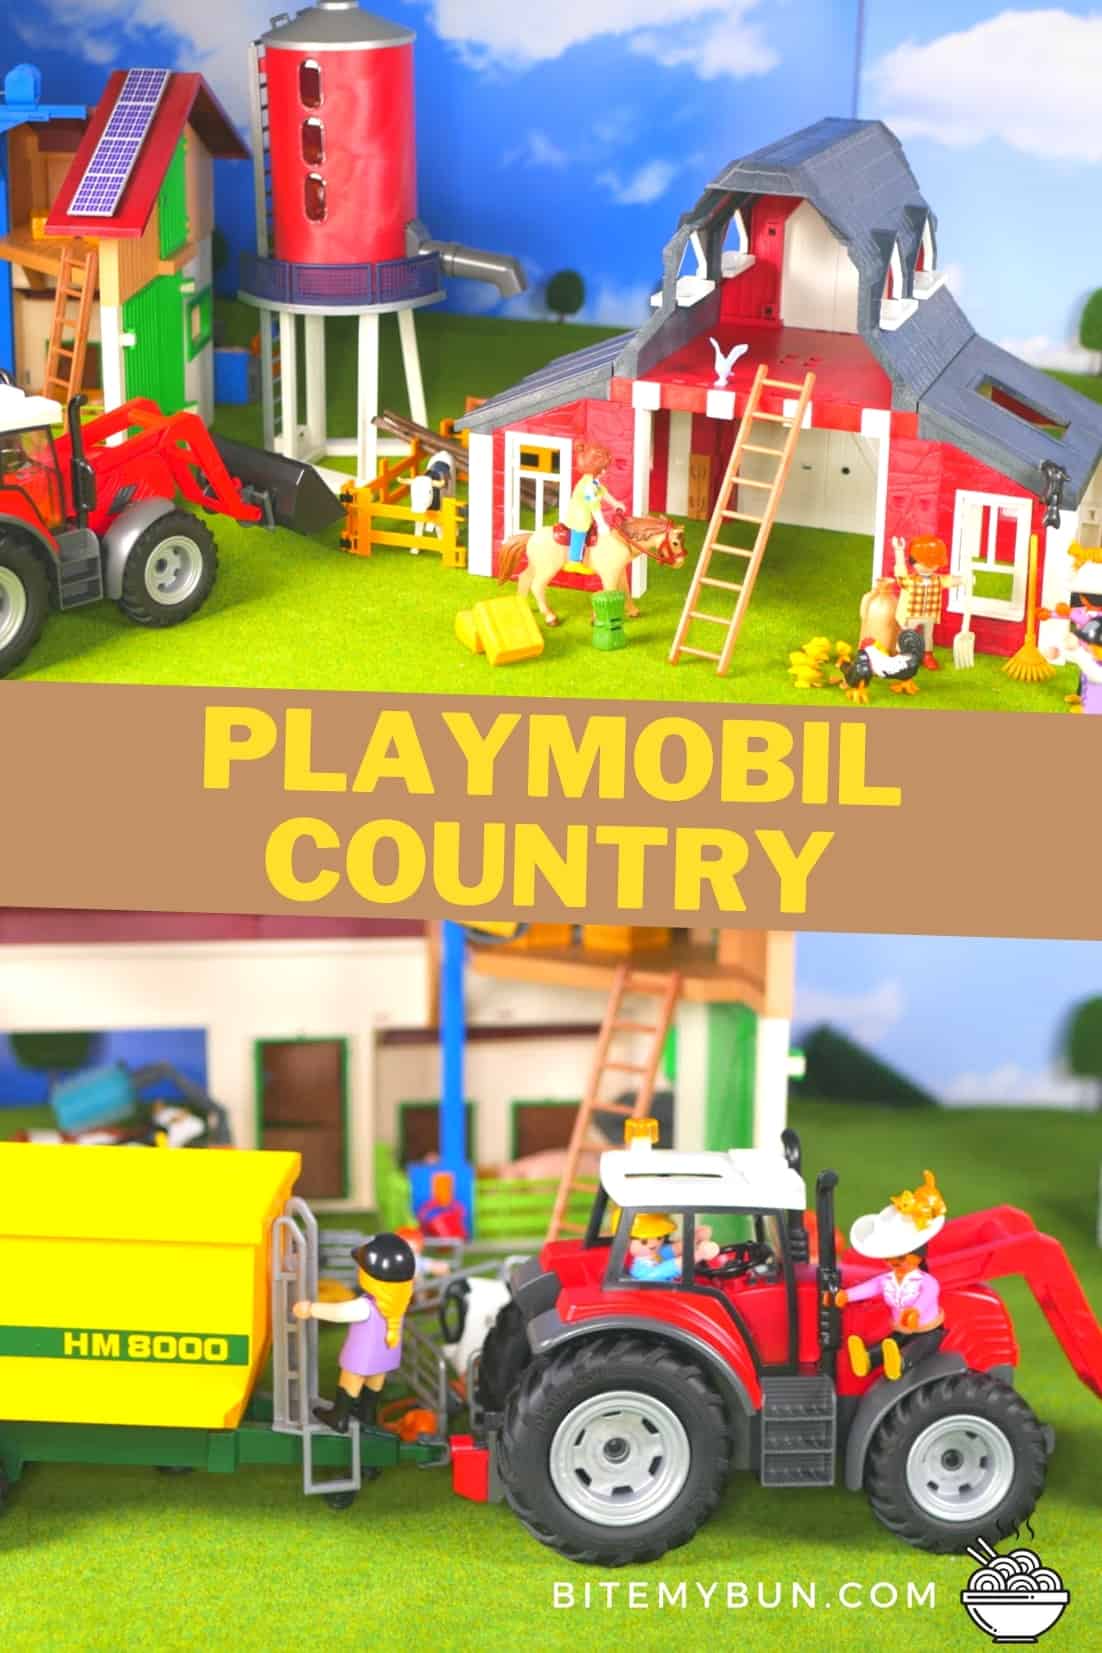 Best playmobil country farm sets rated (1)